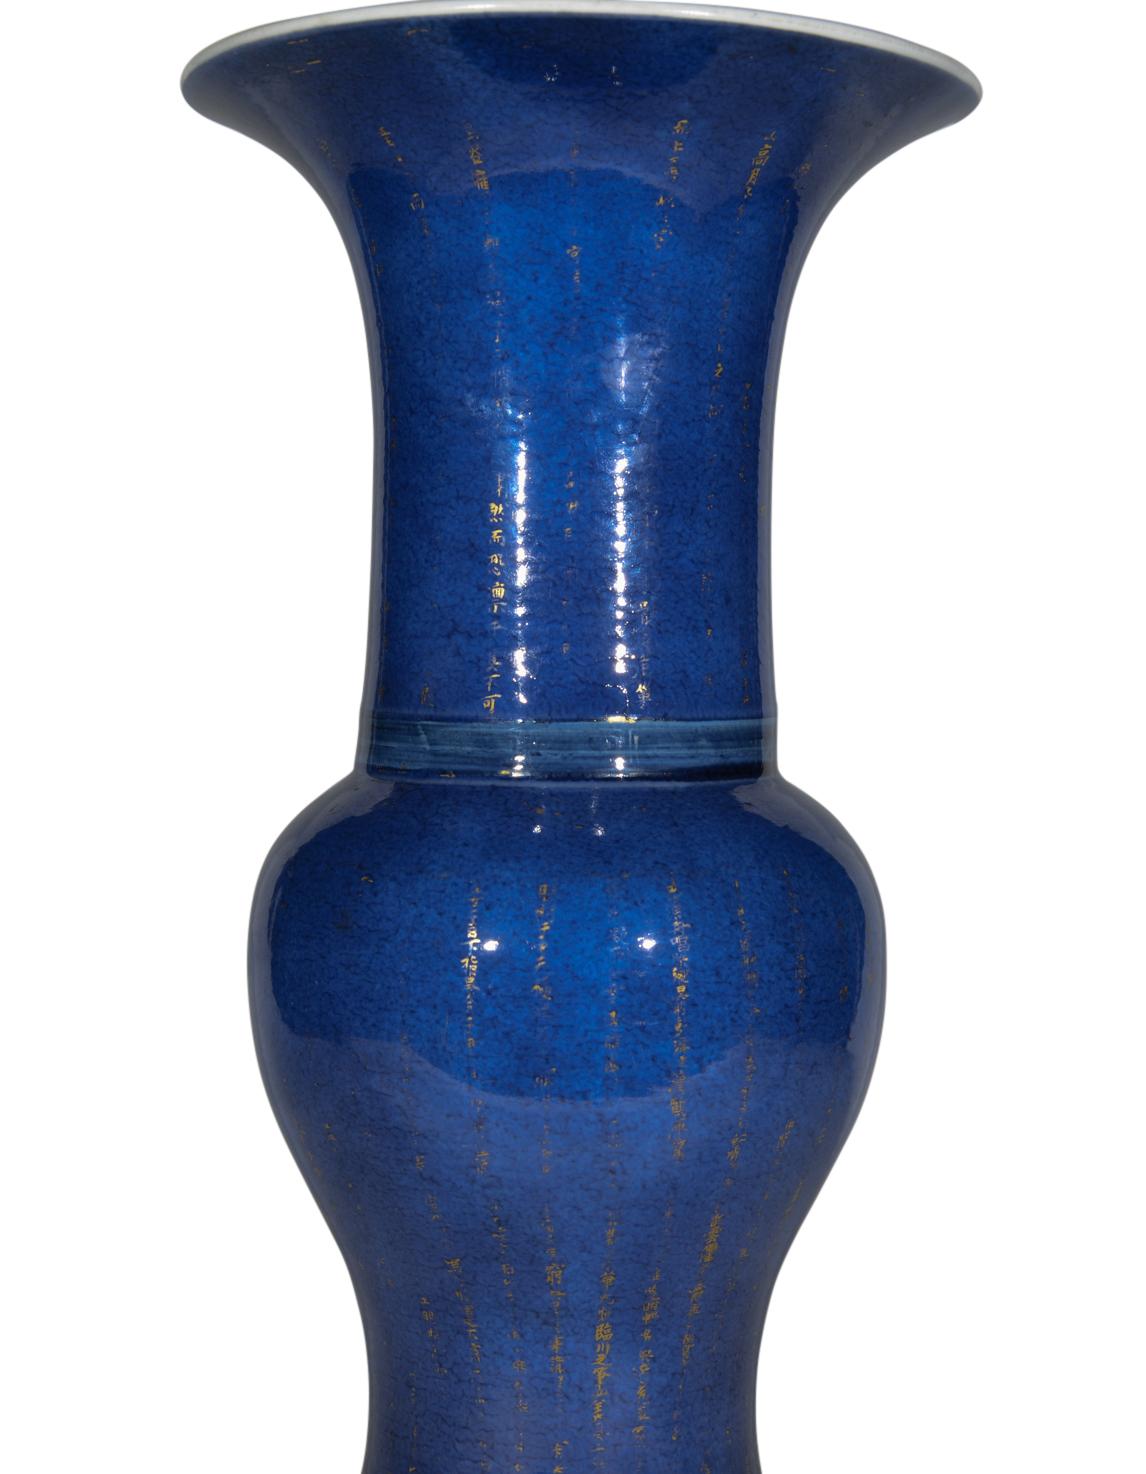 A very fine late 19th century Chinese deep mottled blue glaze baluster vase with flared neck, decorated throughout with rubbed gilt decoration and Chinese inscriptions. Now mounted as a lamp with a hand gilded turned base.

Height of vase: 17 1/4 in